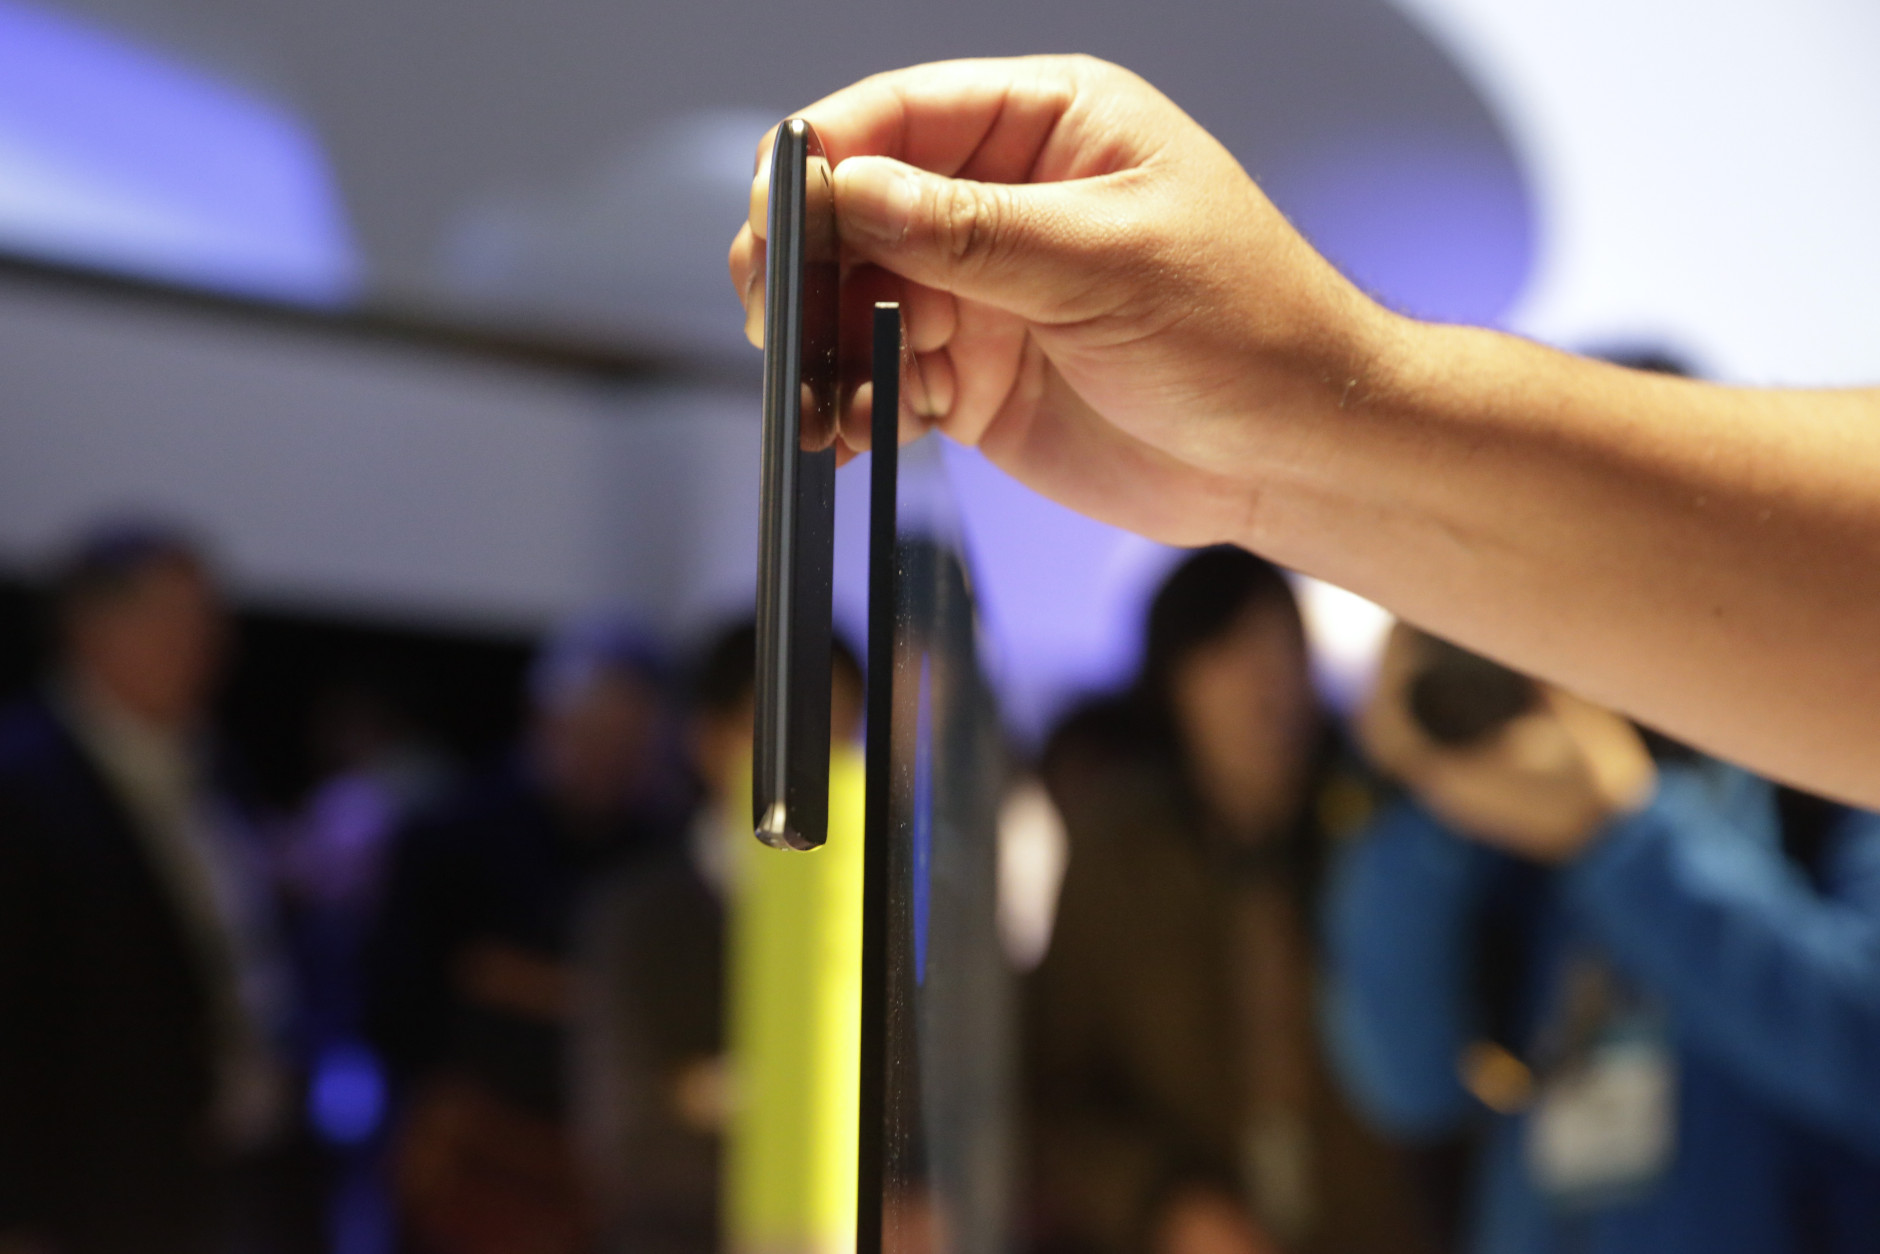 An attendee places his smartphone next to Sony's 65-inch X900 C series 4K Ultra HD TV to compare the thickness at the Sony booth at the International CES Monday, Jan. 5, 2015, in Las Vegas. The display is less than 0.2 inches thick at its slimmest point. (AP Photo/Jae C. Hong)